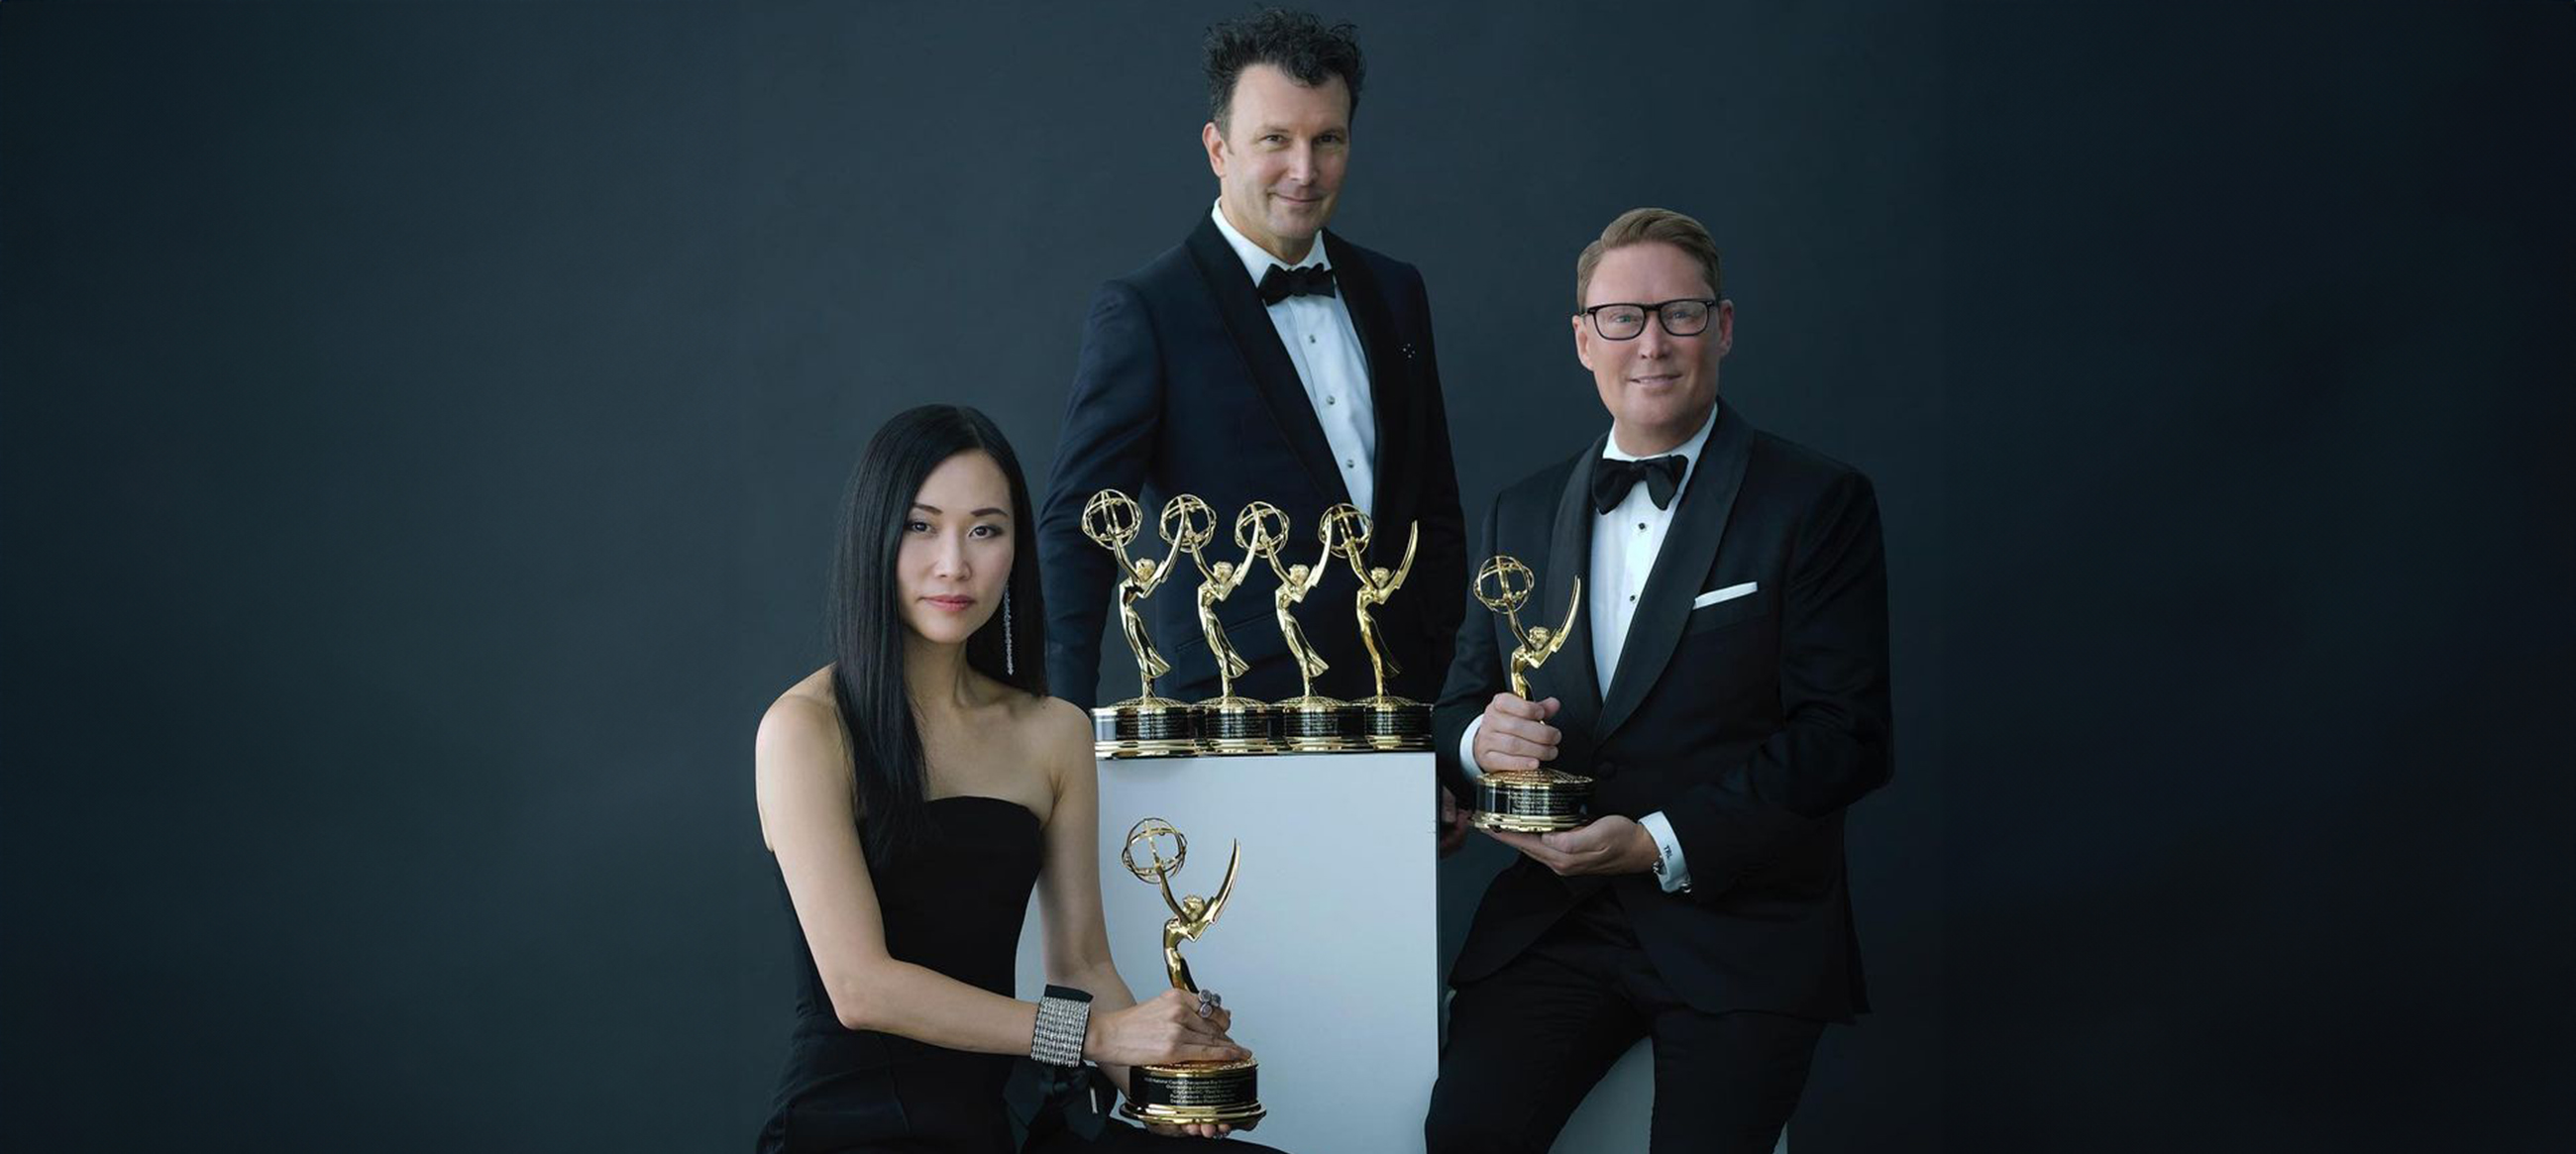 CITYCENTERDC’S “FIND YOUR JOY” CAMPAIGN WINS AN EMMY